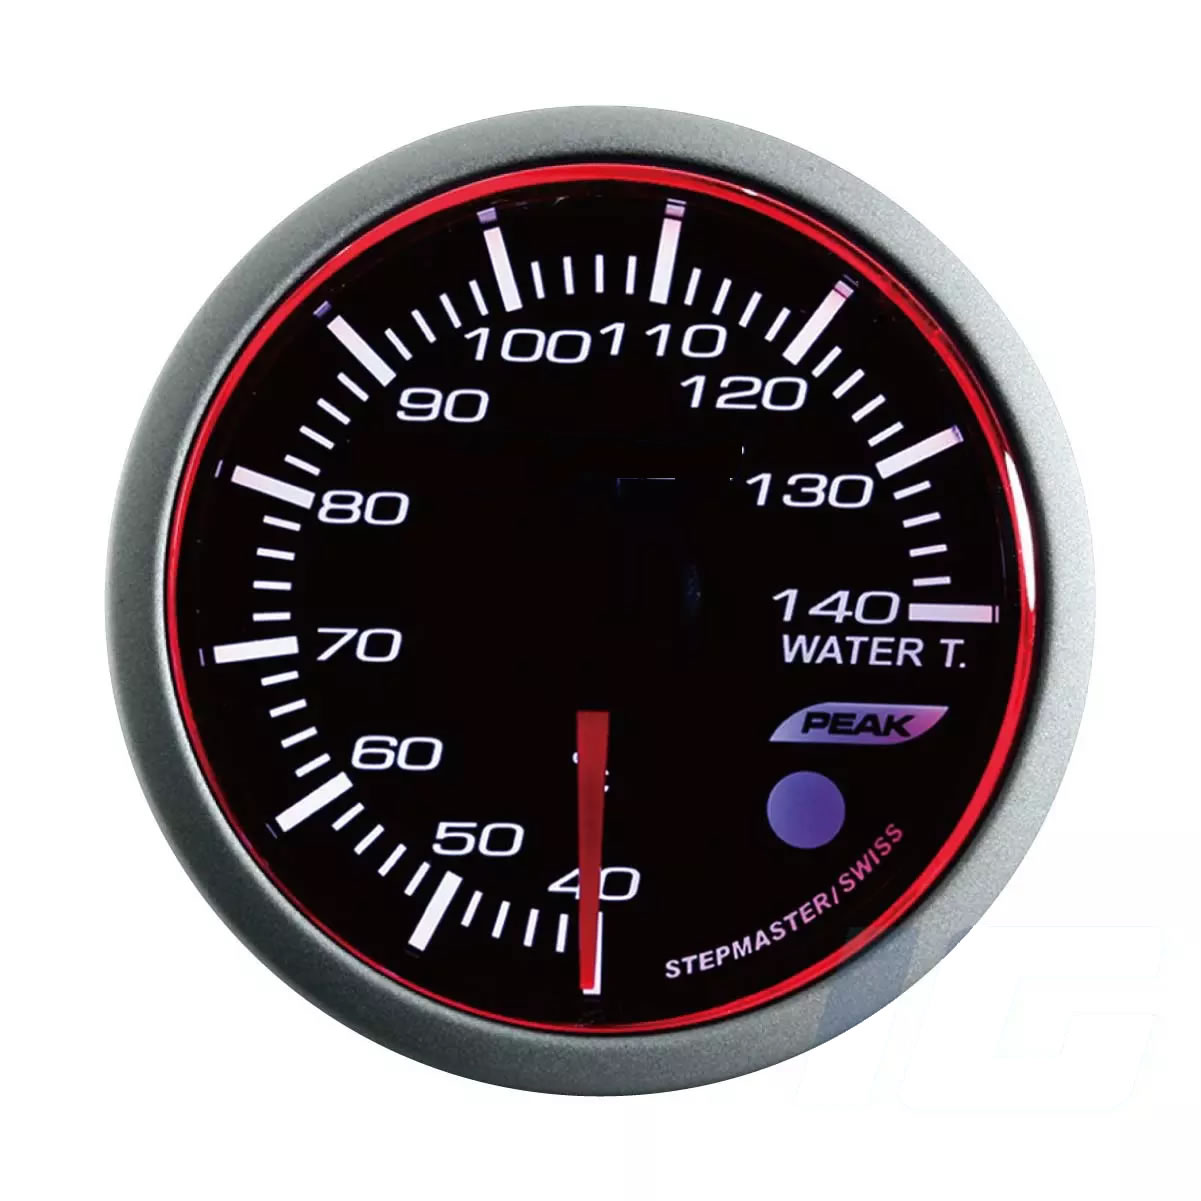 52mm White and Blue and Amber LED Performance Car Gauges - Water Temp Gauge With Sensor and Warning and Peak For Your Sport Racing Car